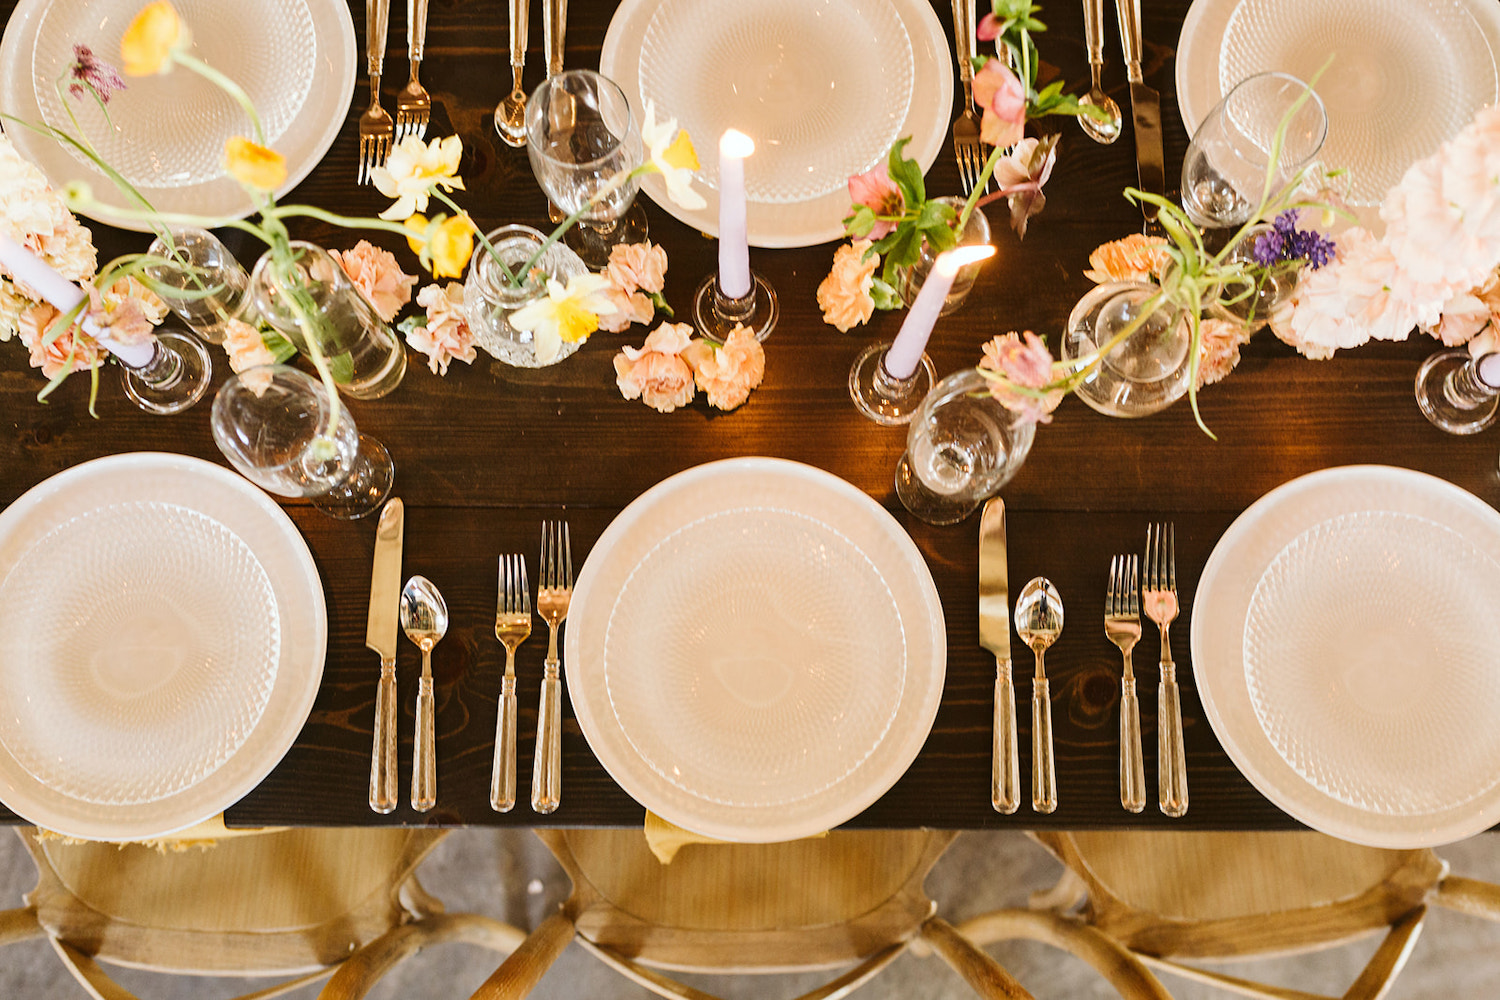 classic white place settings with flatware sits on a wooden farm table with white tapered candles and pink carnations